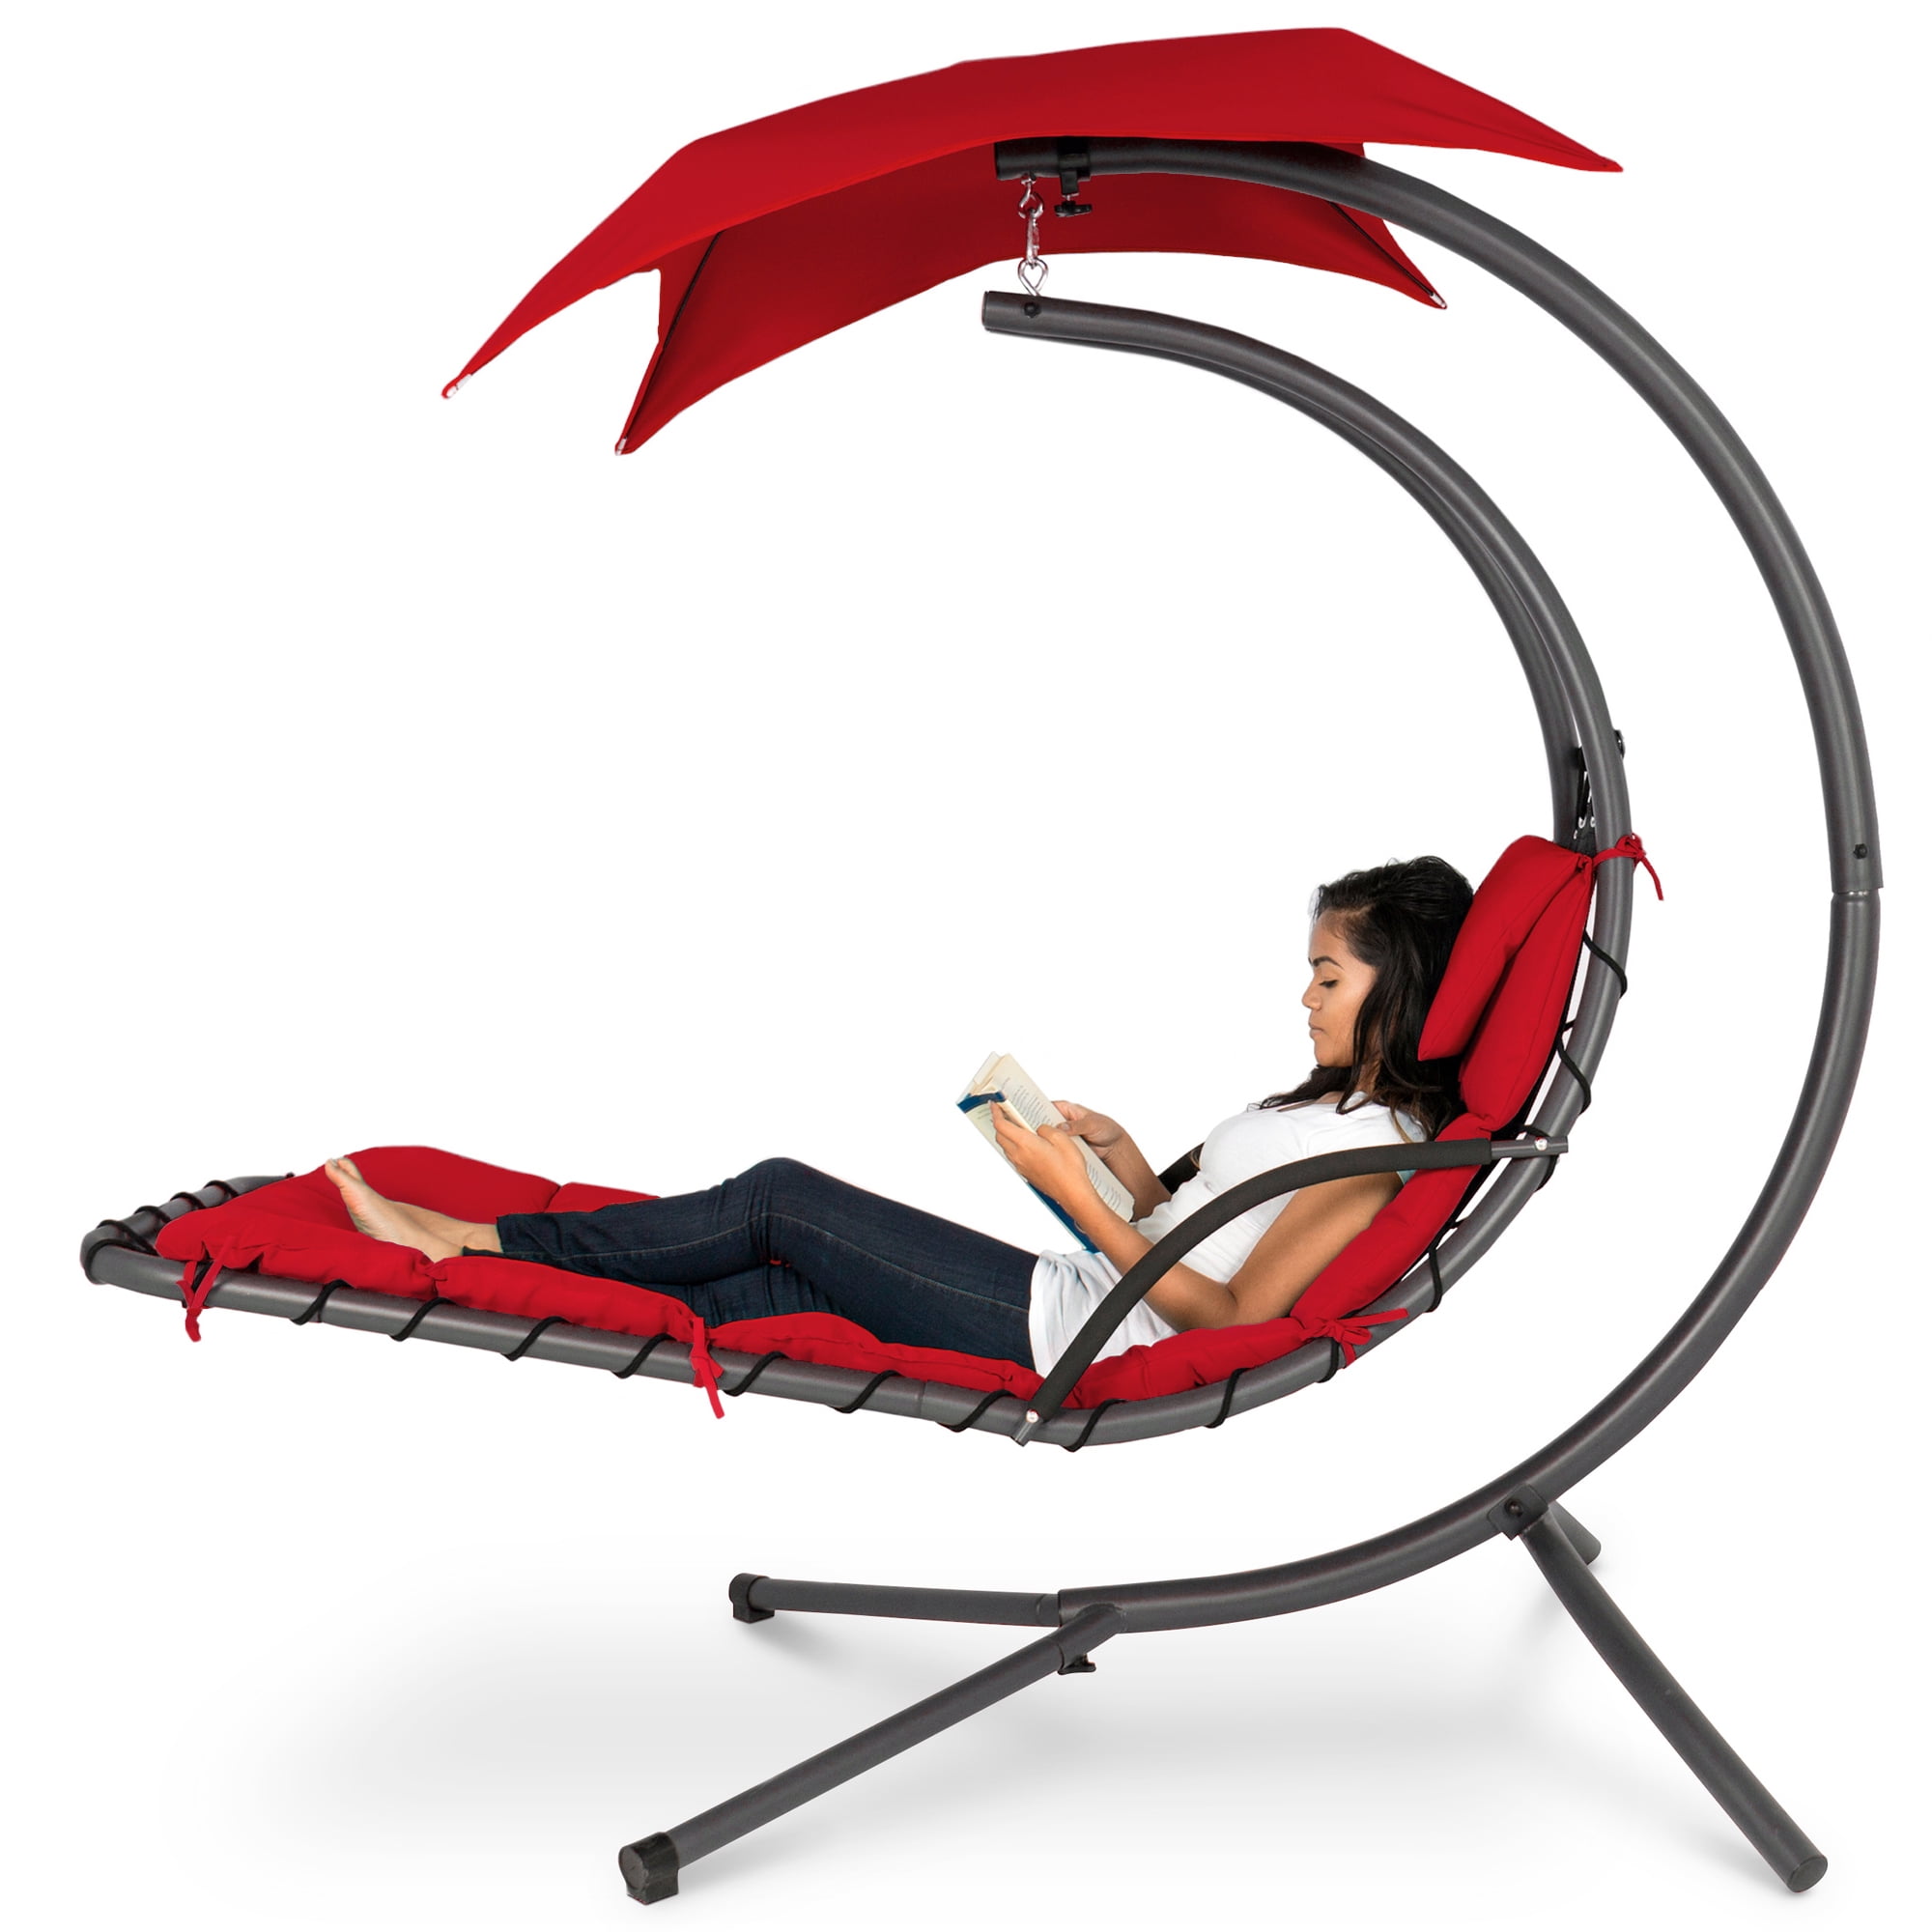 Best Choice Products Hanging Curved Chaise Lounge Chair Swing for Backyard, Patio w/ Pillow, Canopy, Stand - Red